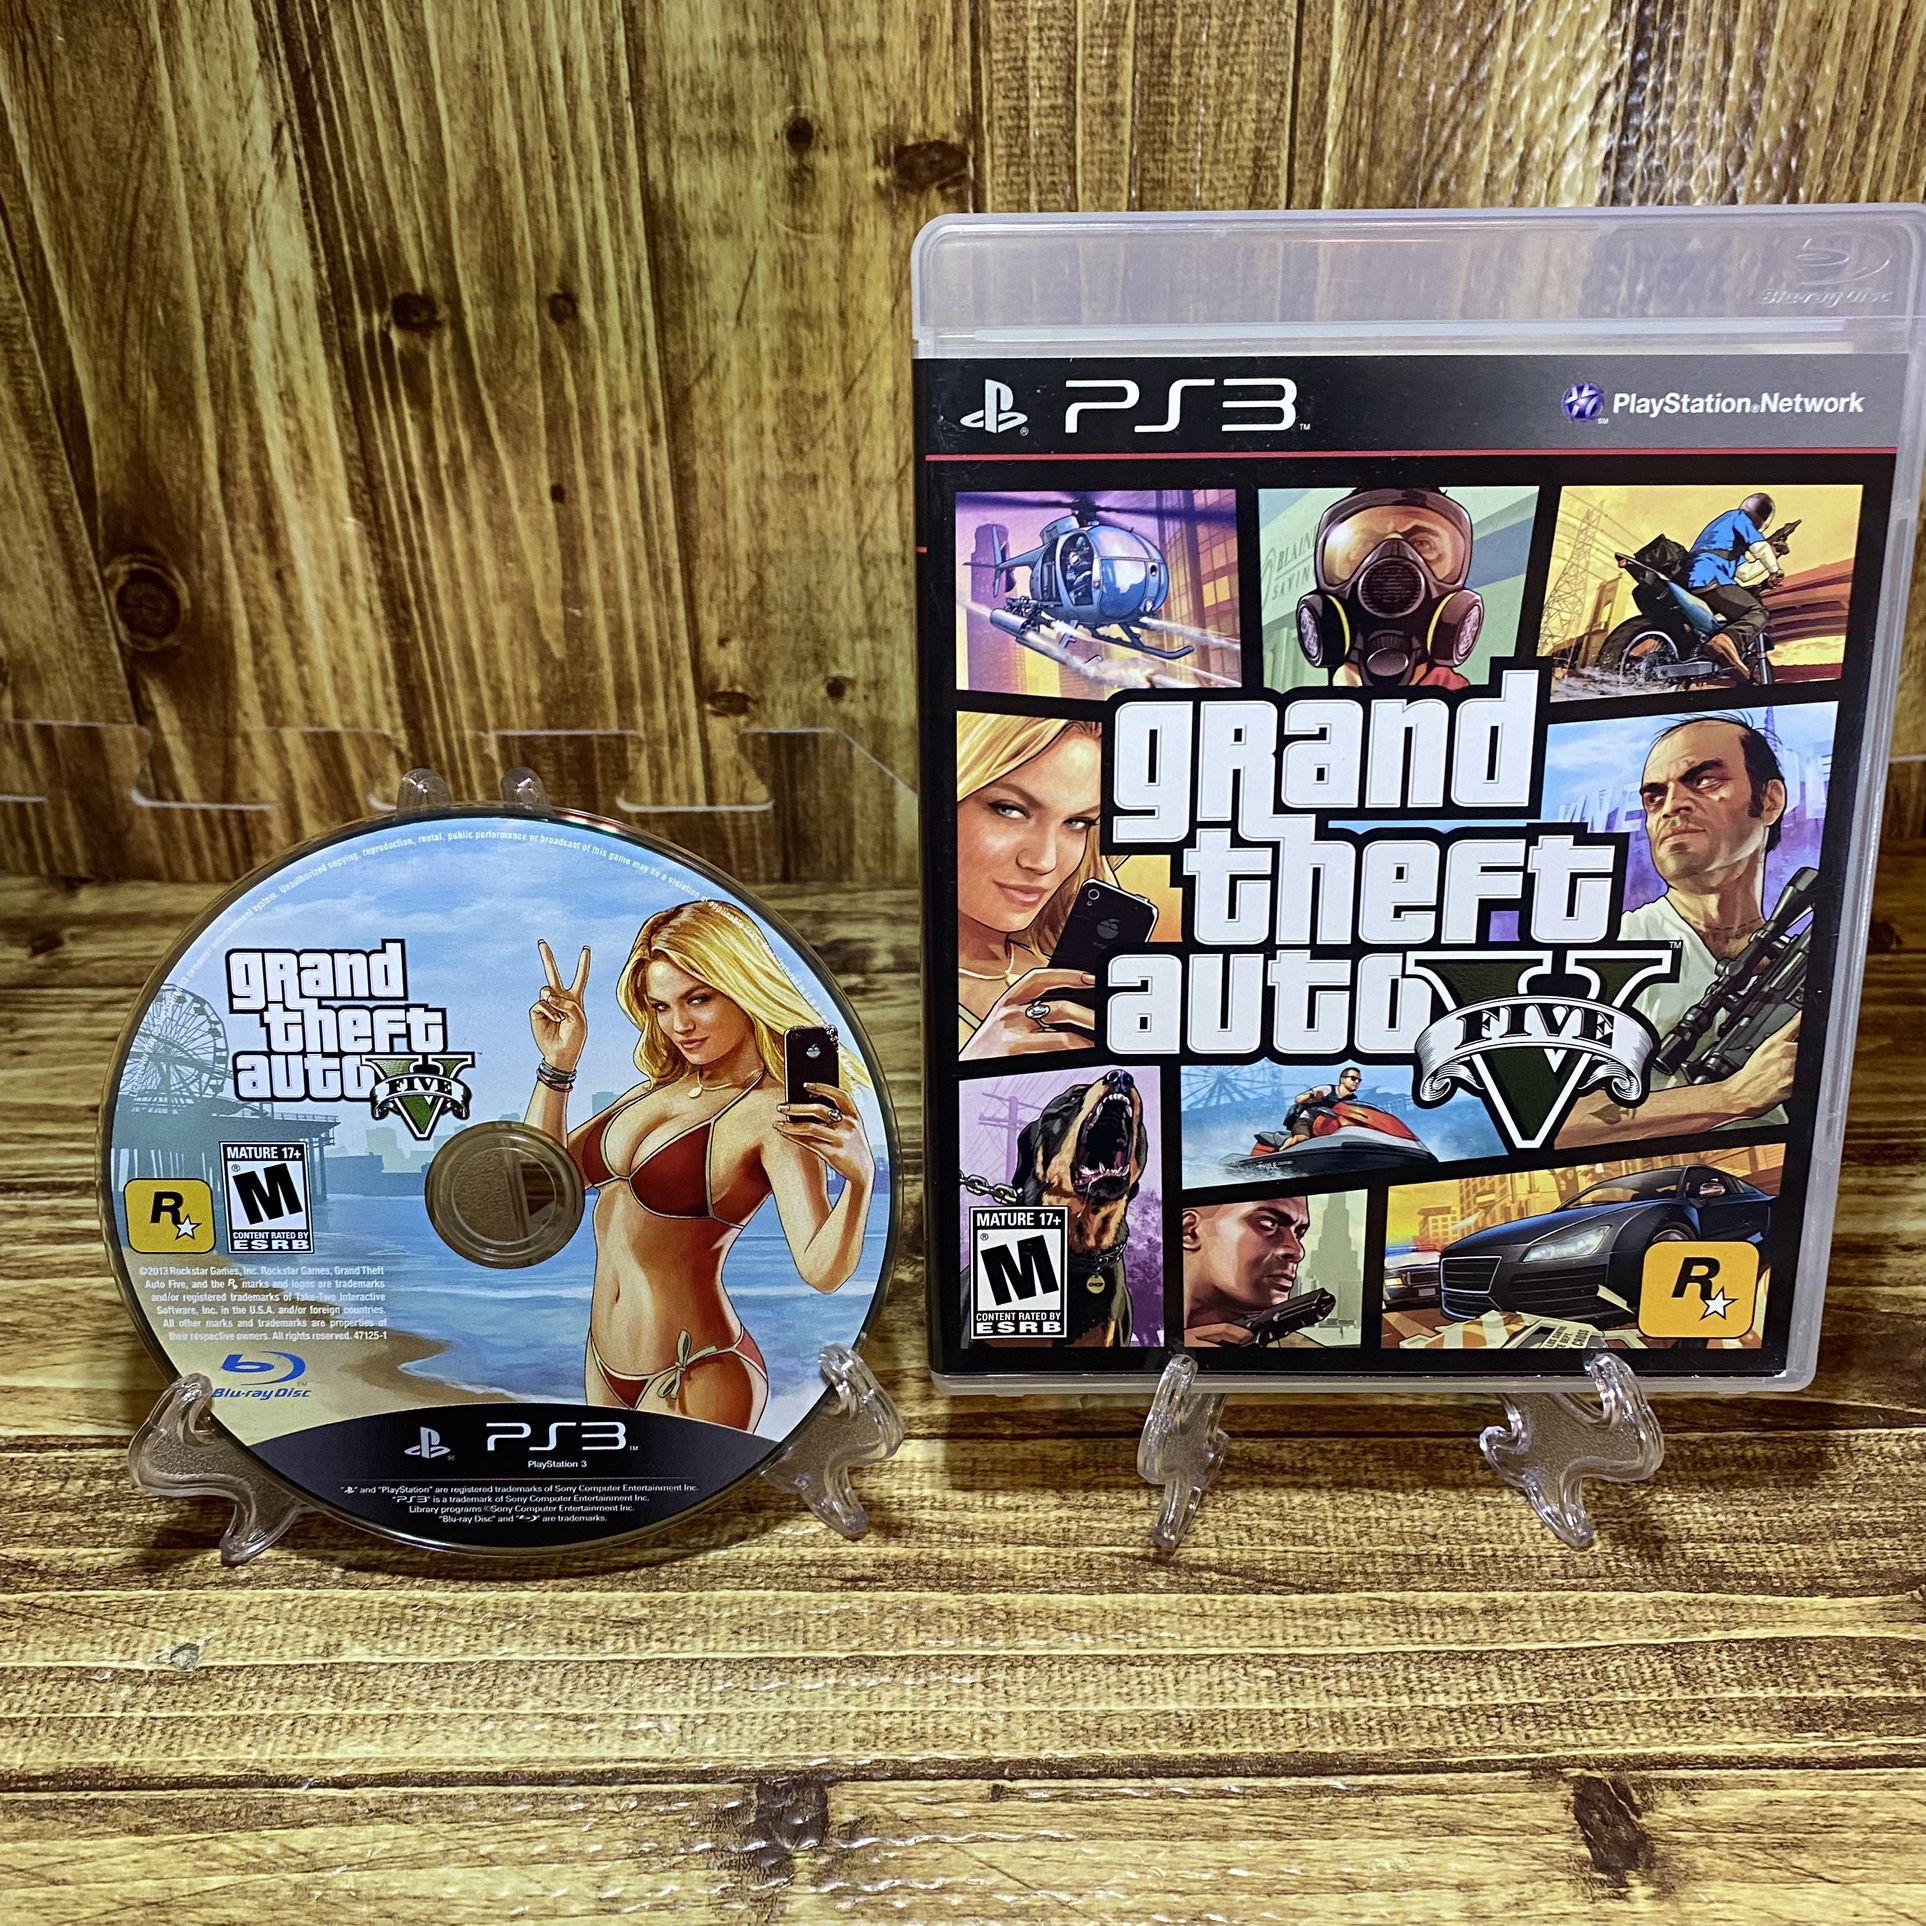 Grand Theft Auto V - GTA 5 - With Map & Manual - Playstation 3 / PS3